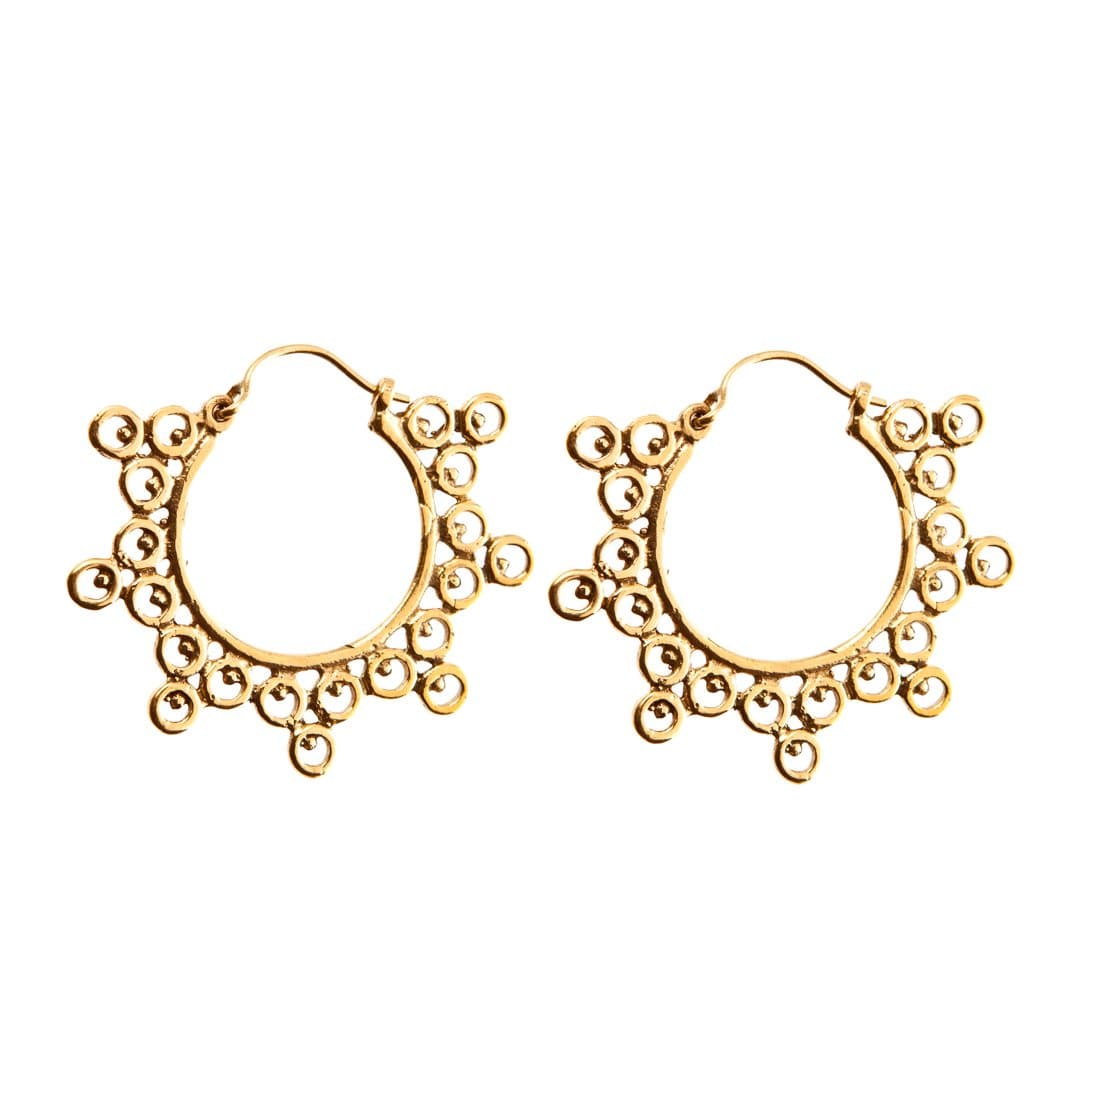 Gold Brass Indian Ethnic Circles Round Hoop Earrings - 81stgeneration